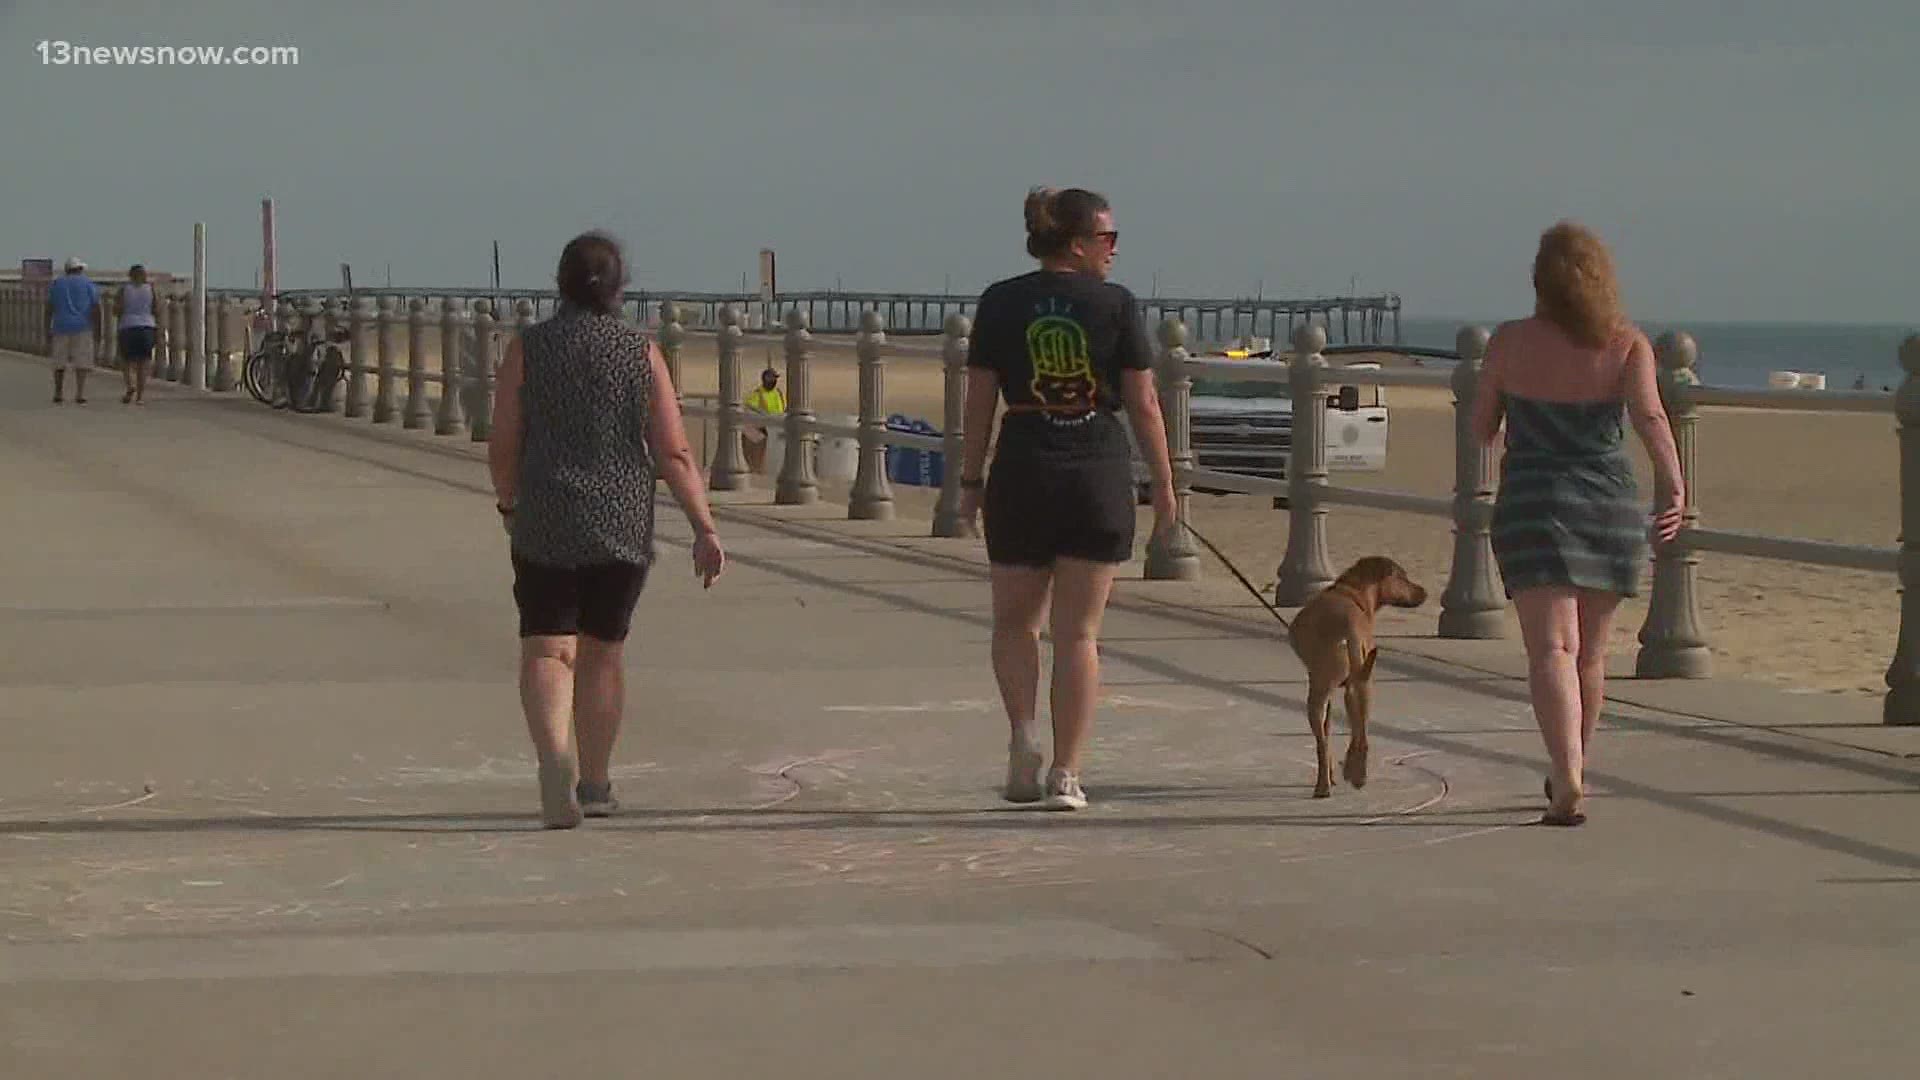 Earlier this spring, beaches were closed to recreation while Virginia tried to stave off the spread of coronavirus. Now people, and dogs, are excited to be back.